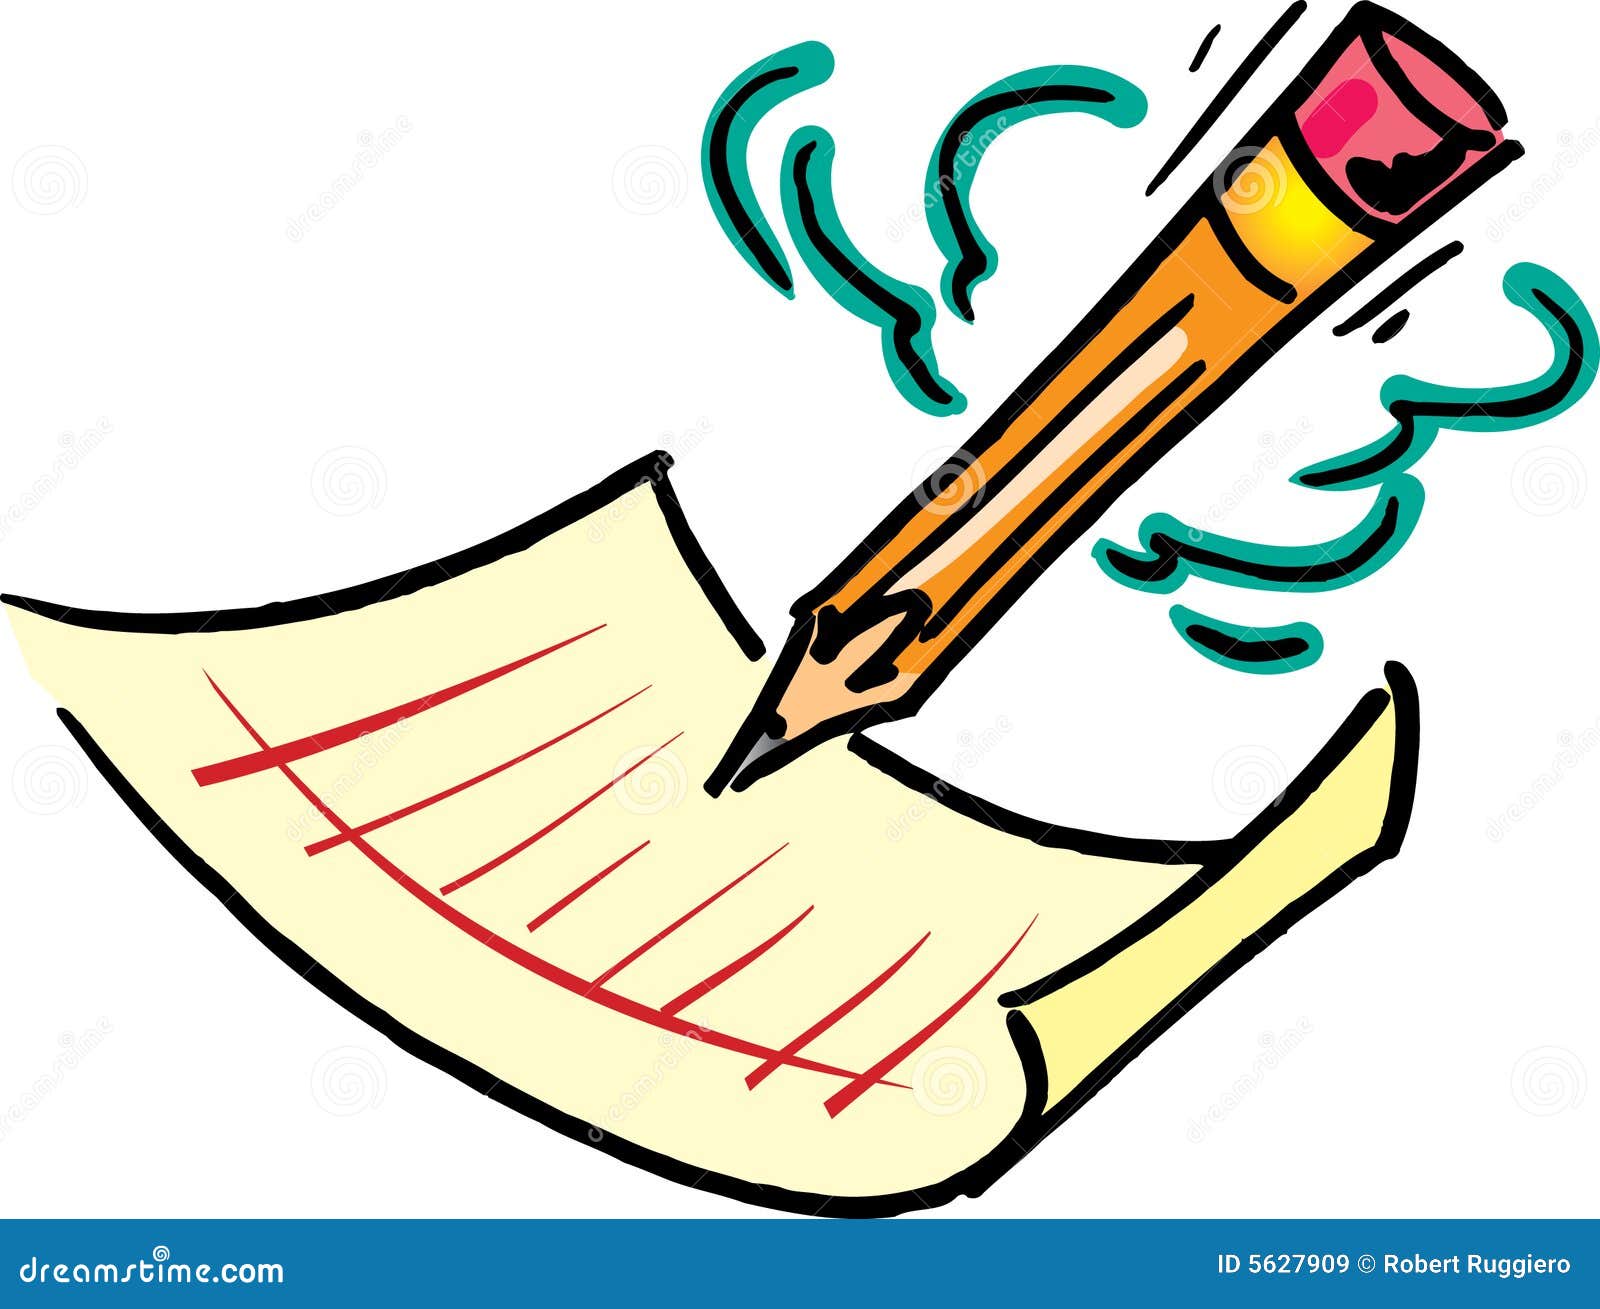 Pencil and Paper stock vector. Illustration of school - 5627909